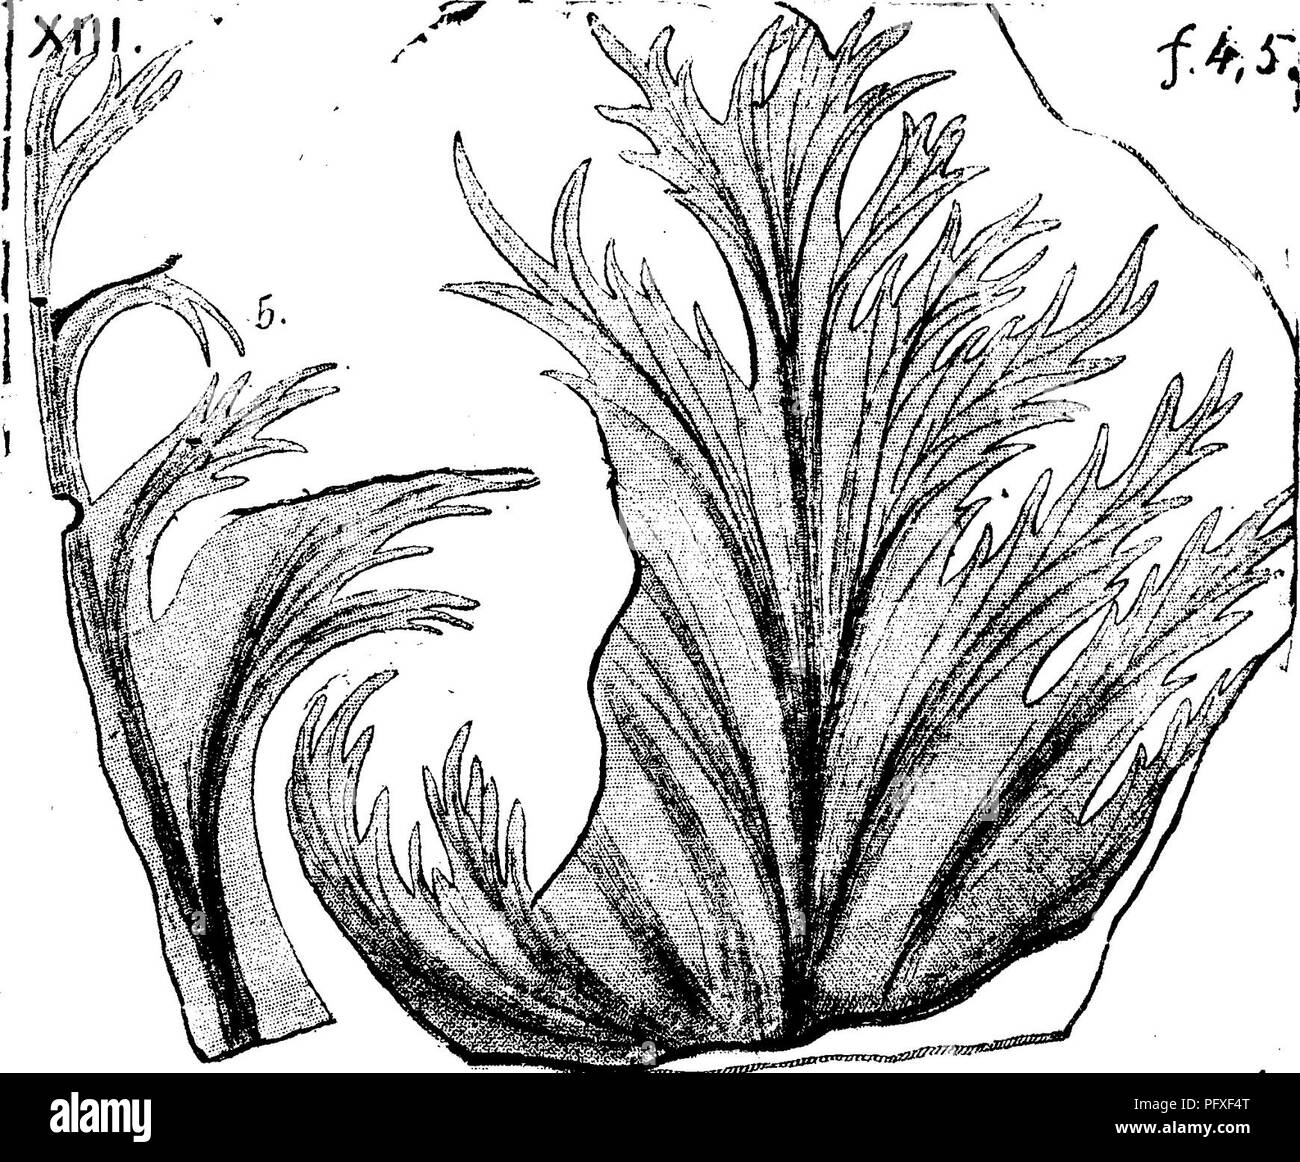 . A dictionary of the fossils of Pennsylvania and neighboring states named in the reports and catalogues of the survey ... Paleontology. Rhacophyllum lactuca, Stern. {Schi^nptpris  lactuca. ^ Fucoi- des cris pus. Gutb ; Hymeno- phyllites lactuca Lesq. Geol. 111., '^IV, 418; Pachy- phyllum lactuca^ Lesq. Geol. Fa.,  , -, .- 1858, p. L'^Sg4^S^:^a^^iypj^;it^^ /^^.^. rl. ^, l 863, plate 8, tig. 4, 5, from Gate Vein, New FhiladeJphia, iSchuylkill Co., Fa. Not scarce in the European and American coal measures. Lesquereux has seen a iragment with leaves, or wings, at- tached (?) to a broad common ra Stock Photo